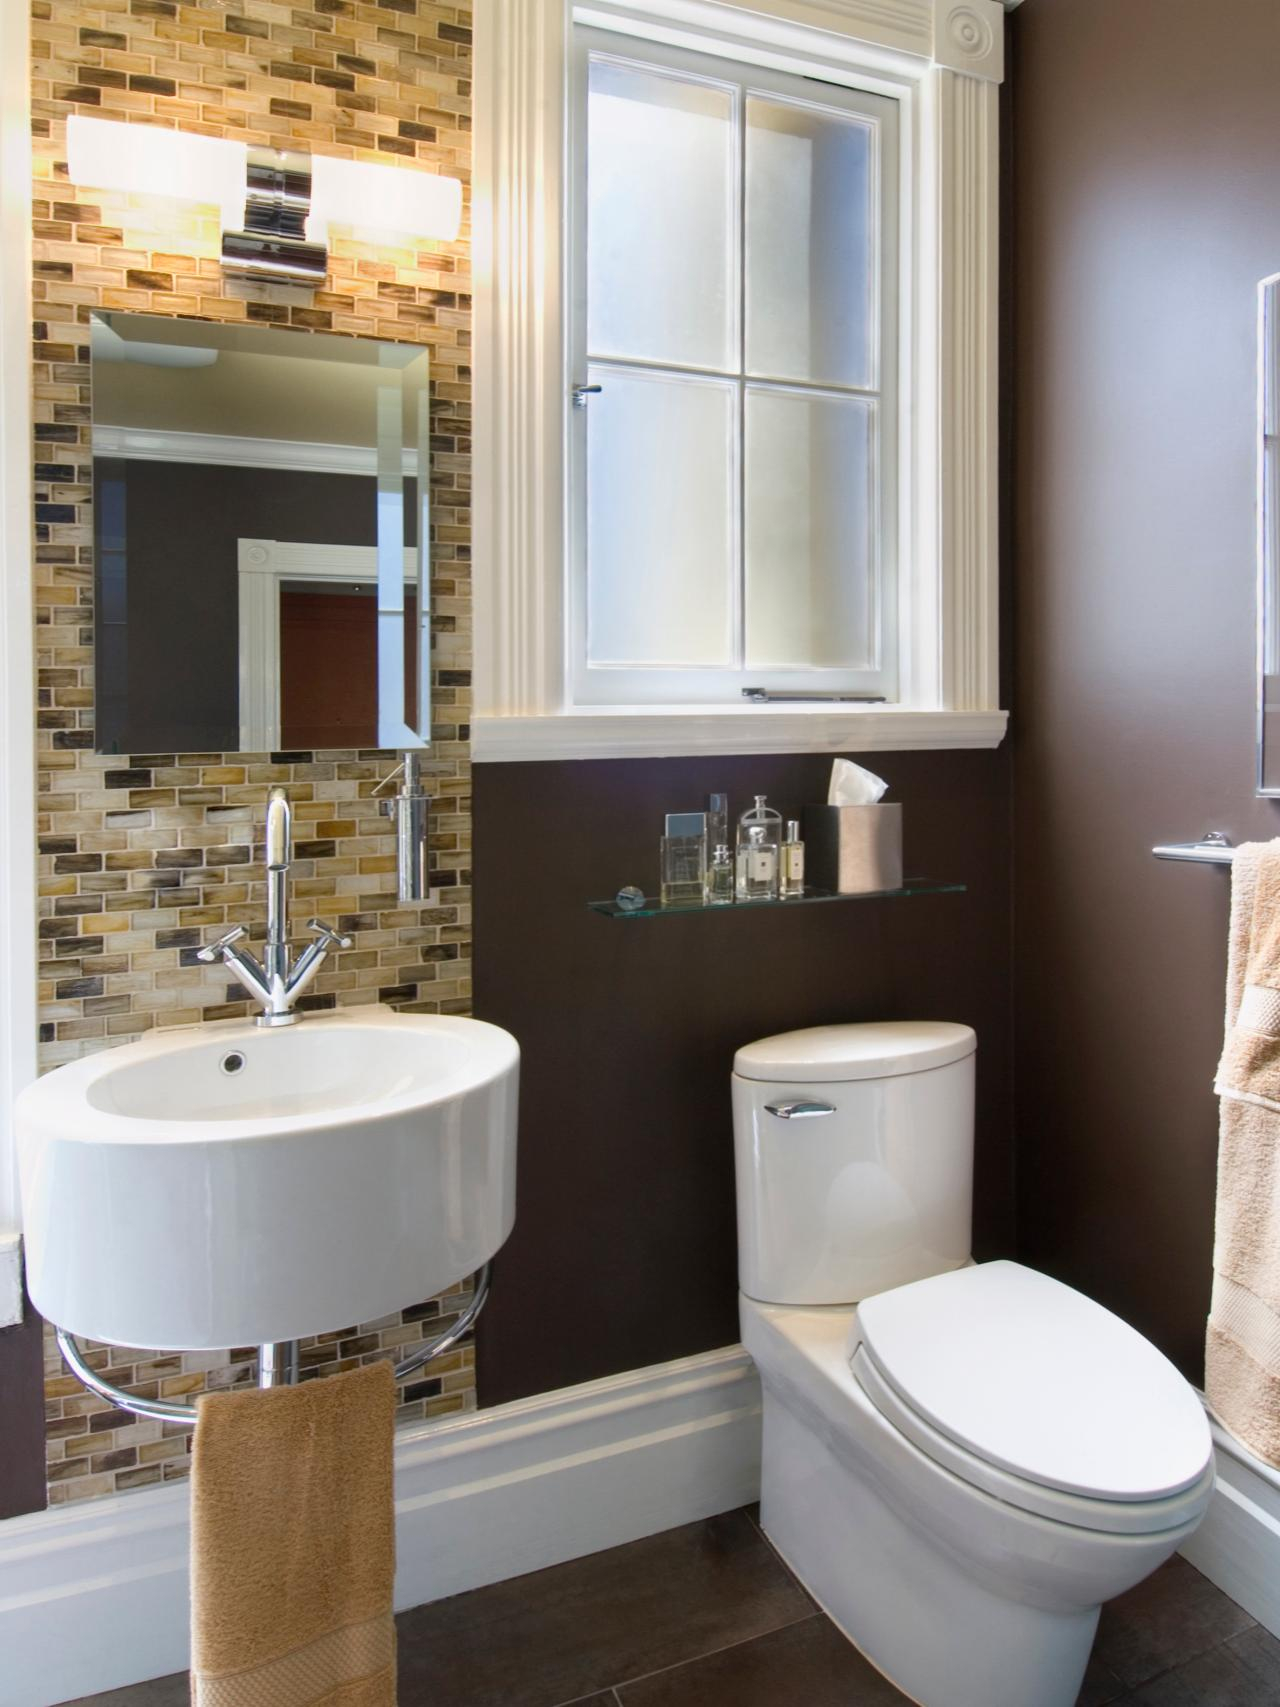 Bathroom Remodel Ideas Small Space Placement Furniture Really within size 1280 X 1707